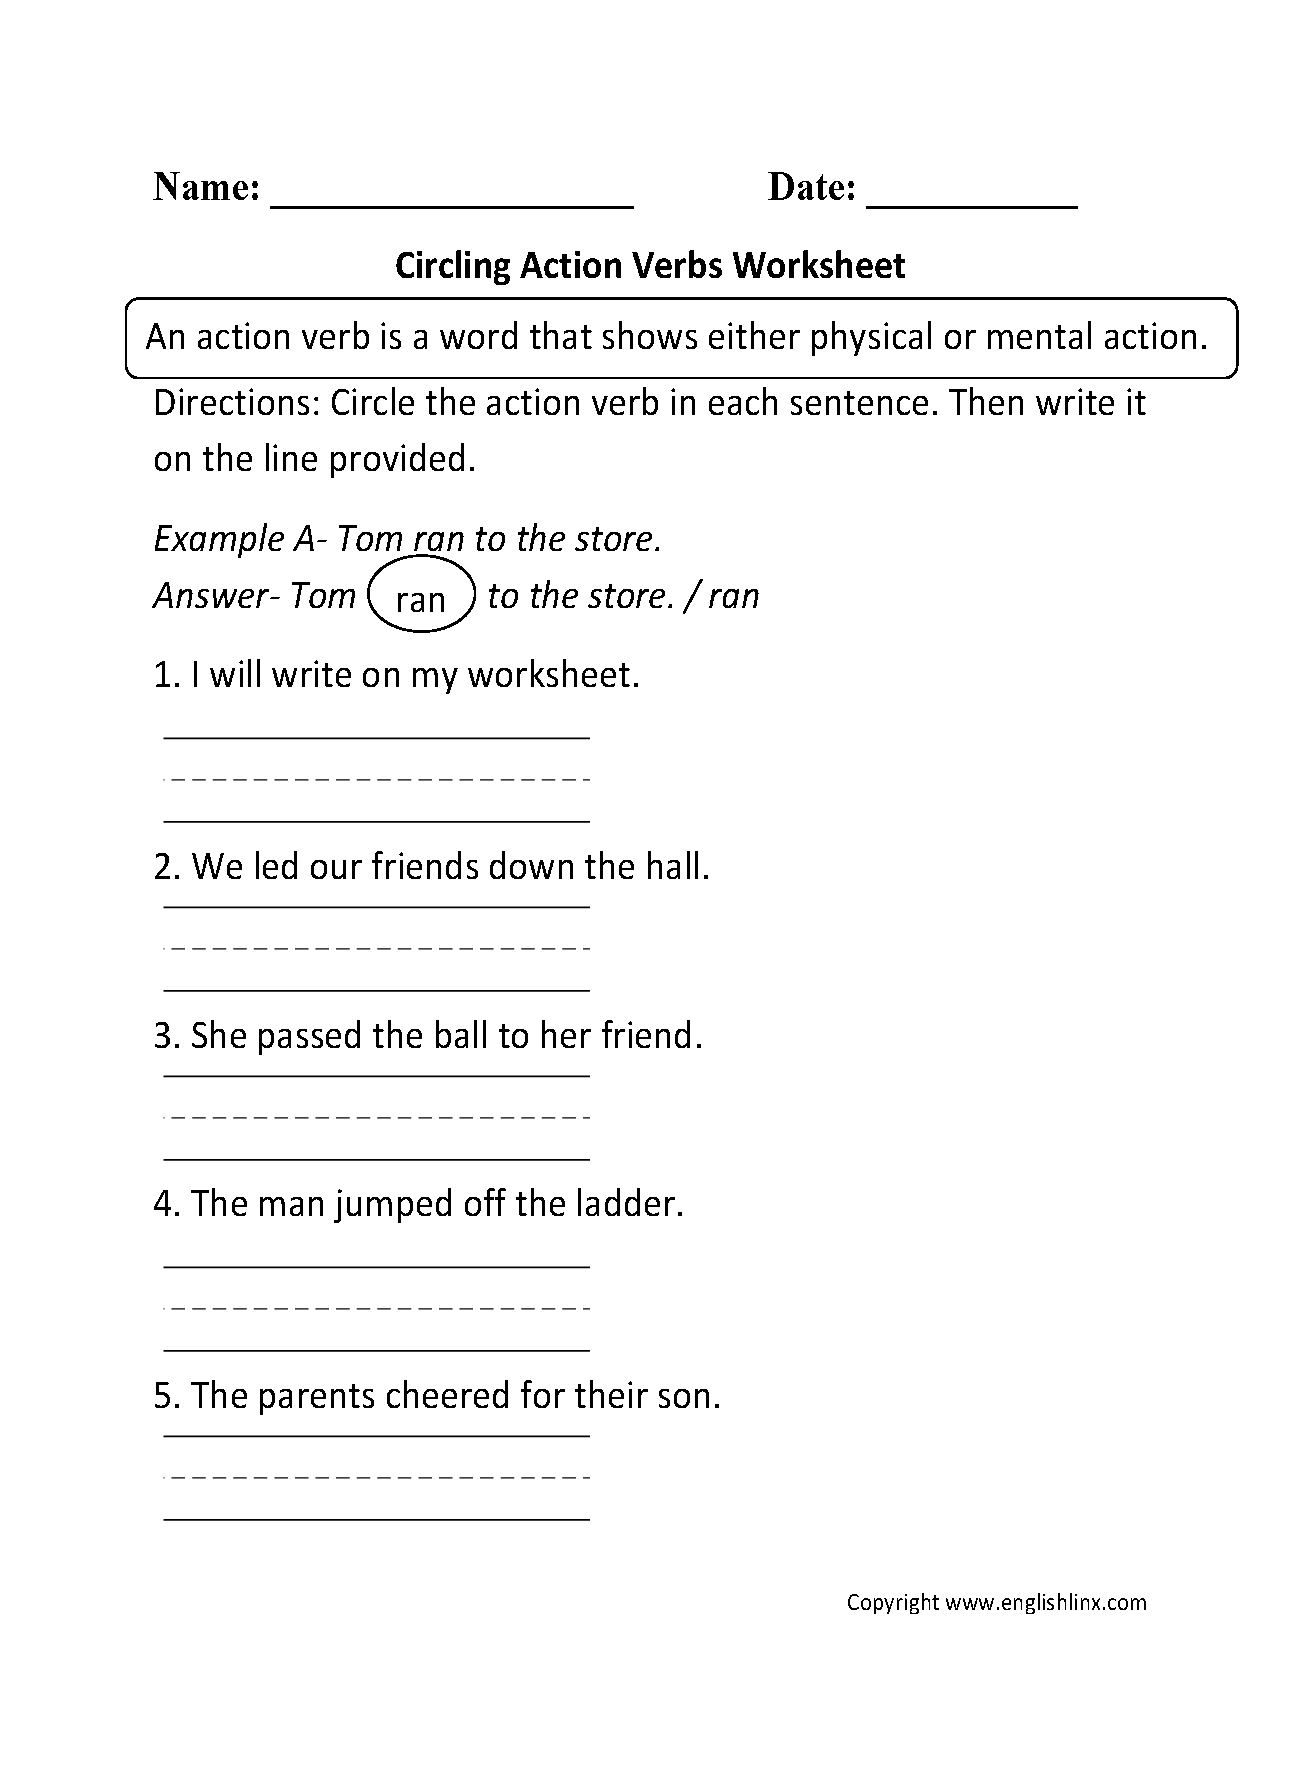 Verbs Worksheets  Action Verbs Worksheets For Verbs Worksheets For Grade 1